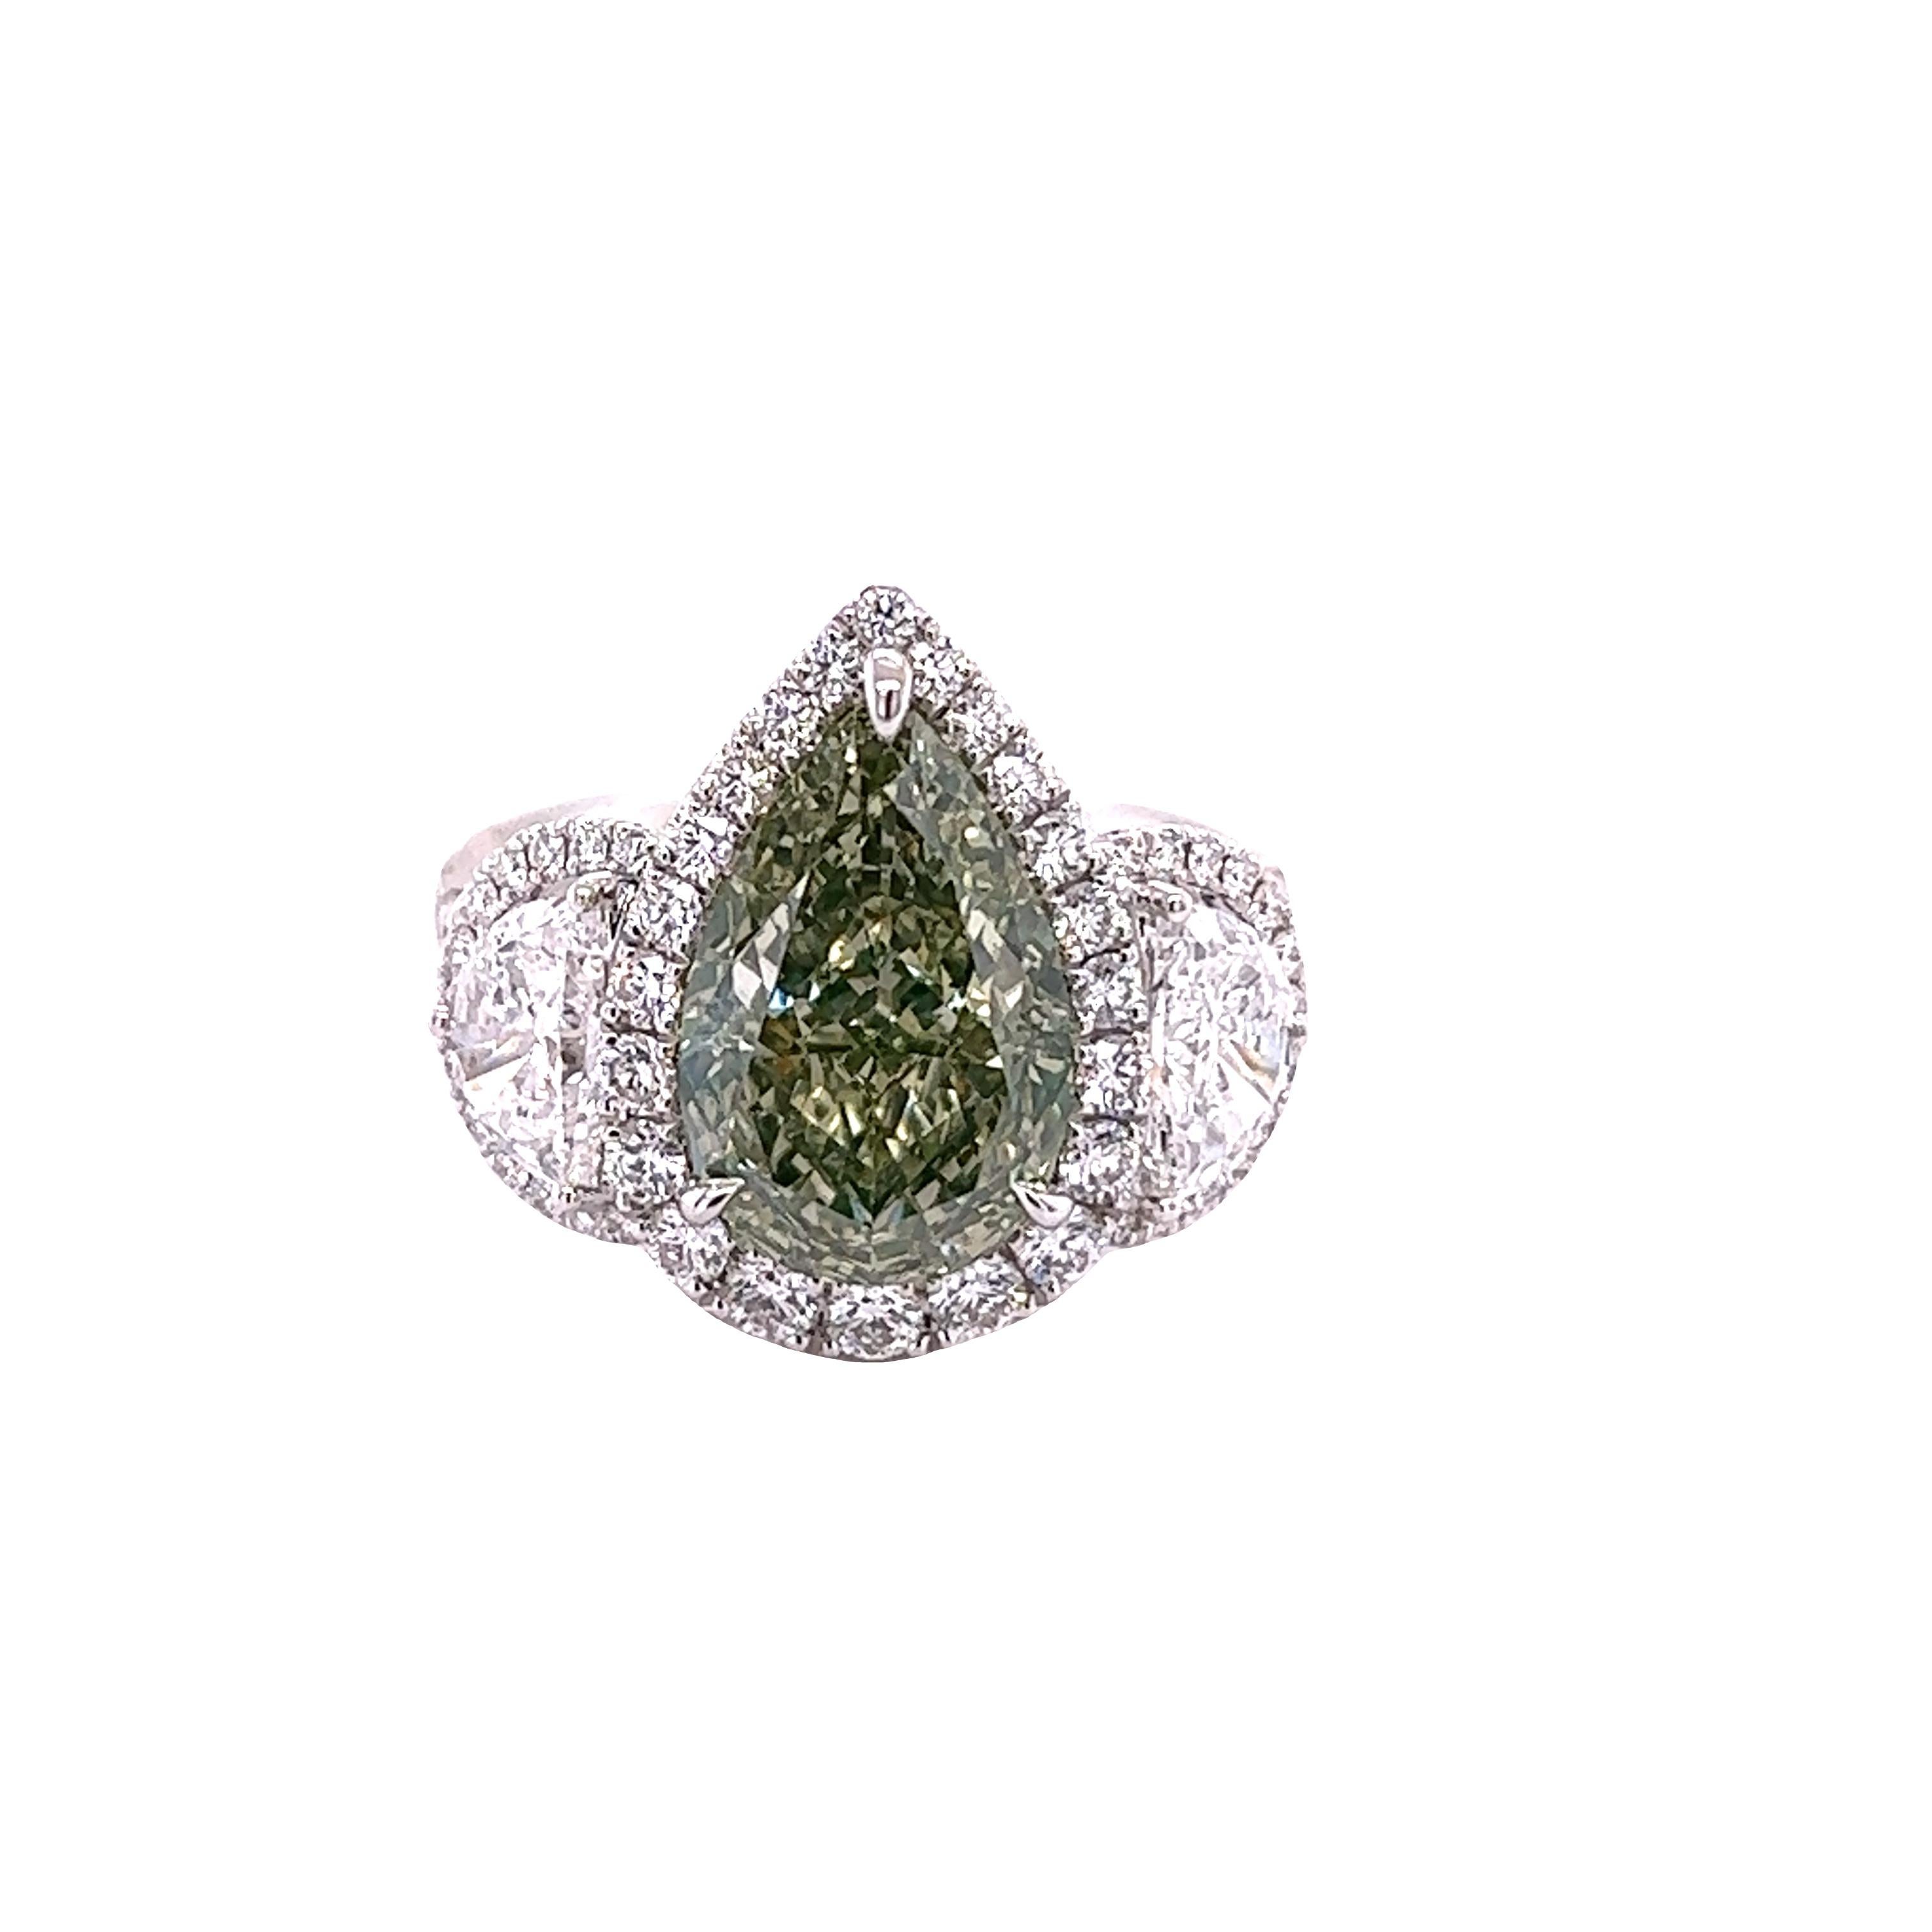 Rosenberg Diamonds & Co. 5.02 carat Pear shape Fancy Green Yellow VS1 clarity is accompanied by a GIA certificate. This spectacular rare pear is full of brilliance and is set in a handmade 18k white gold setting with perfectly matched pair of